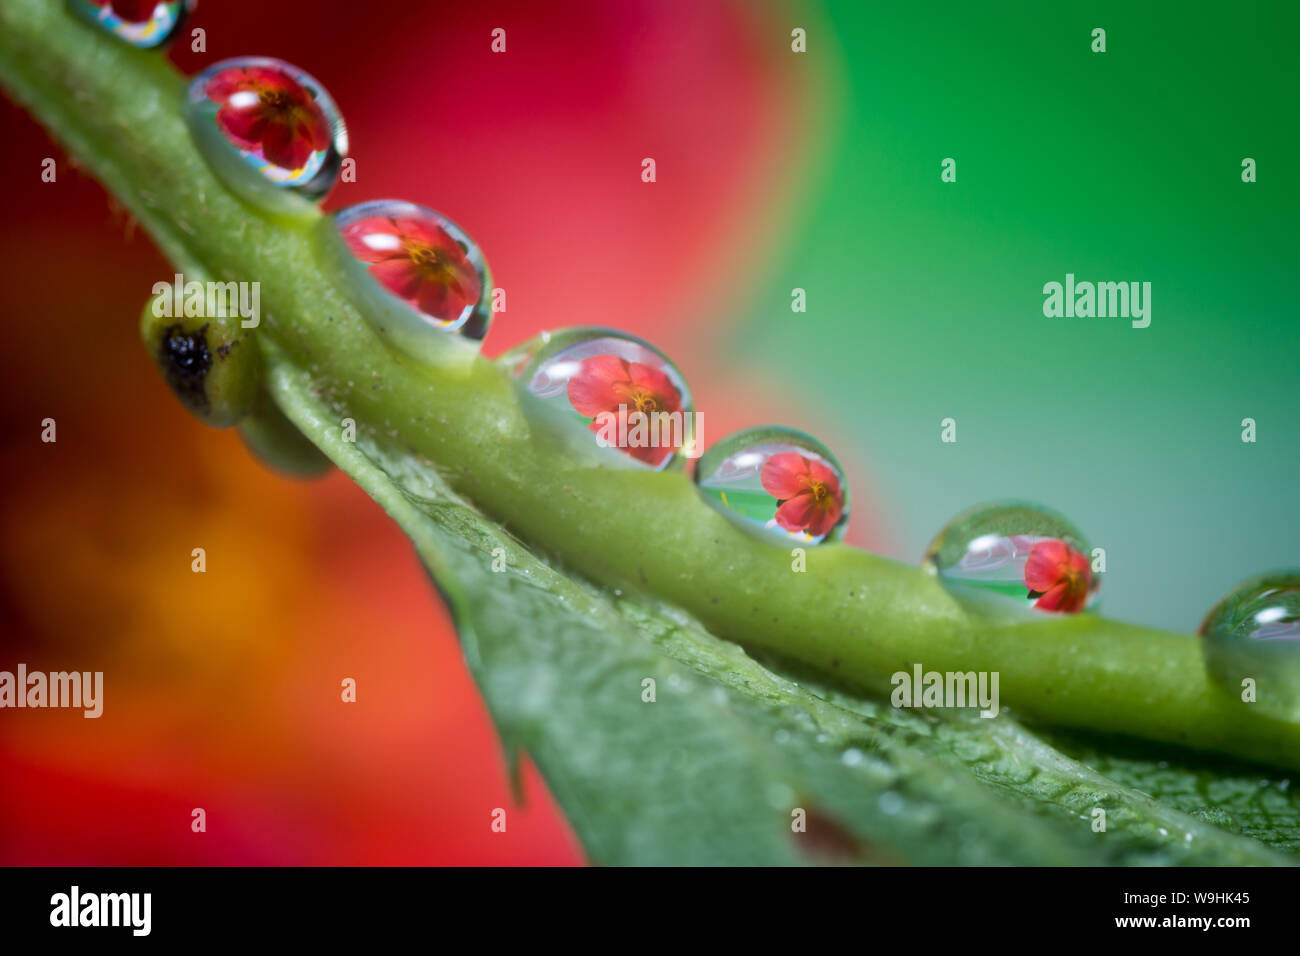 Water drop on the green leaf magnifying a red flower from the background. Macro close up shot. Stock Photo